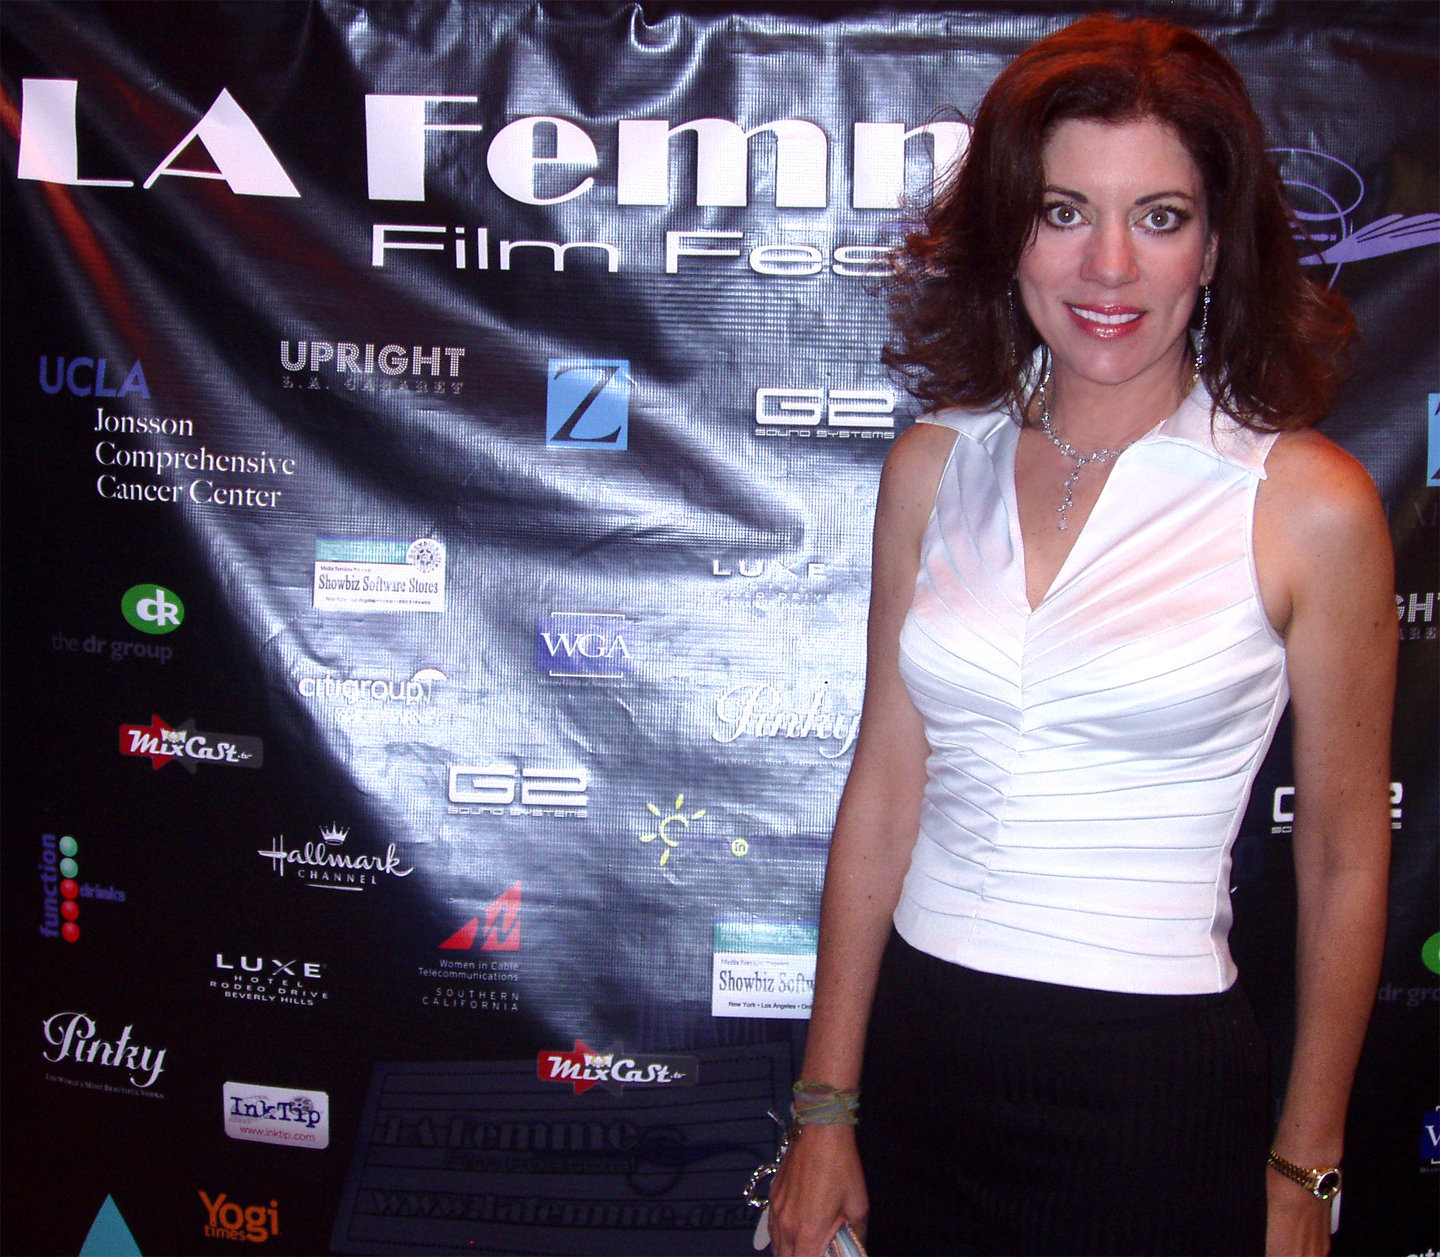 La Femme Film Festival honors actress/filmmaker Kathi Carey with 3 additional screenings of her film to benefit the Jonsson breast center at UCLA.